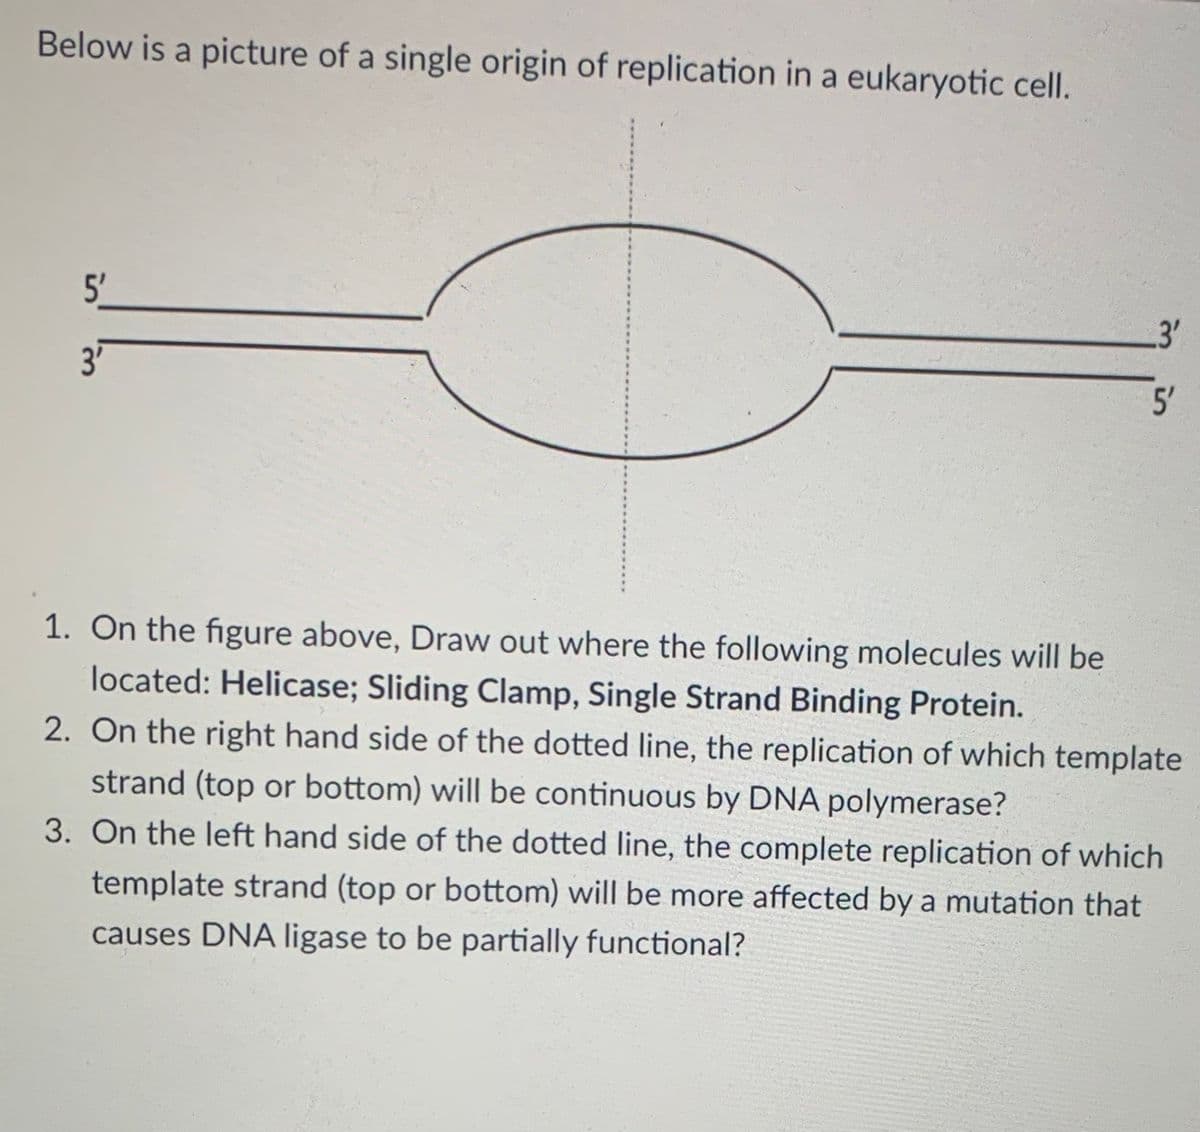 Below is a picture of a single origin of replication in a eukaryotic cell.
5'
3'
5'
1. On the figure above, Draw out where the following molecules will be
located: Helicase; Sliding Clamp, Single Strand Binding Protein.
2. On the right hand side of the dotted line, the replication of which template
strand (top or bottom) will be continuous by DNA polymerase?
3. On the left hand side of the dotted line, the complete replication of which
template strand (top or bottom) will be more affected by a mutation that
causes DNA ligase to be partially functional?
